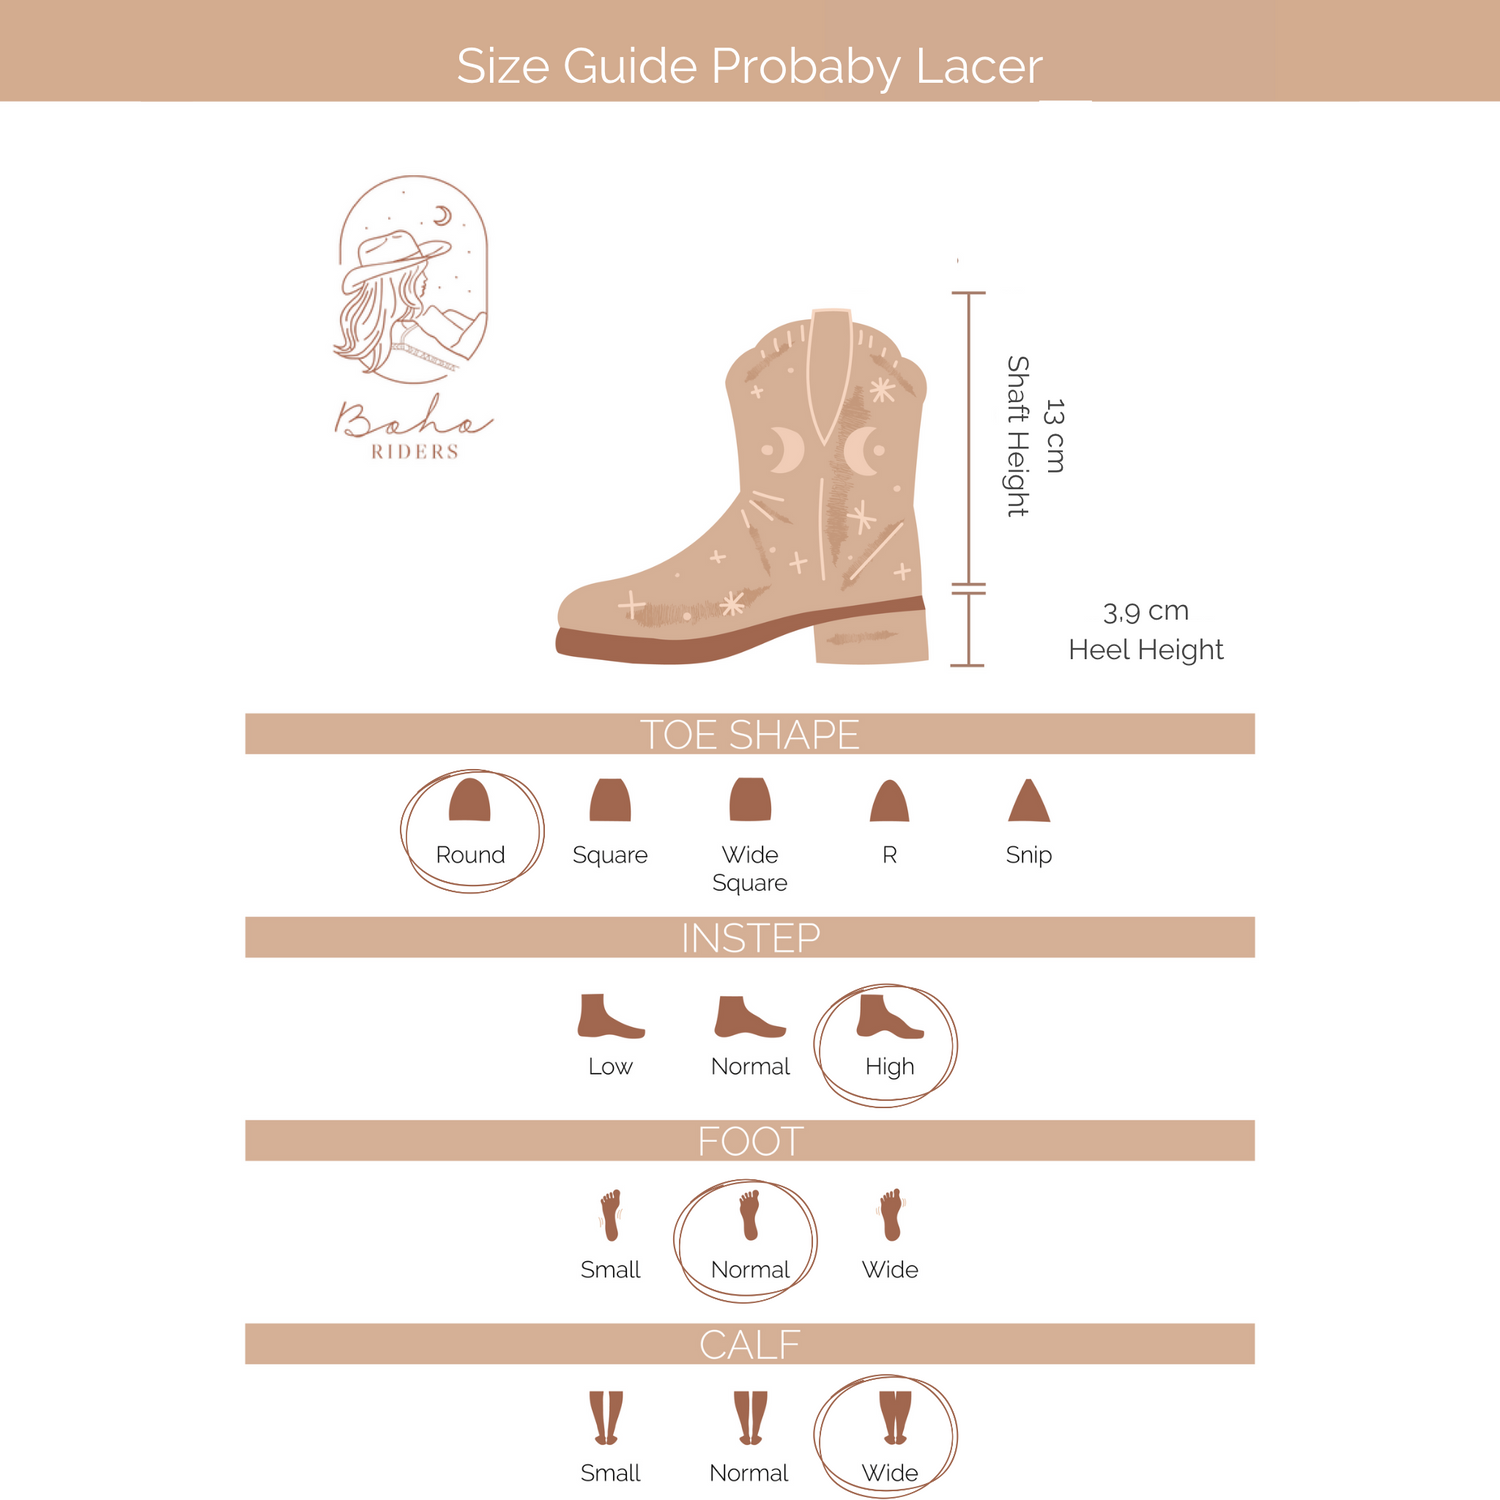 What you want to know about the fit ofAriat Probaby Lacer Boots - Riding Boots - Driftwood Brown